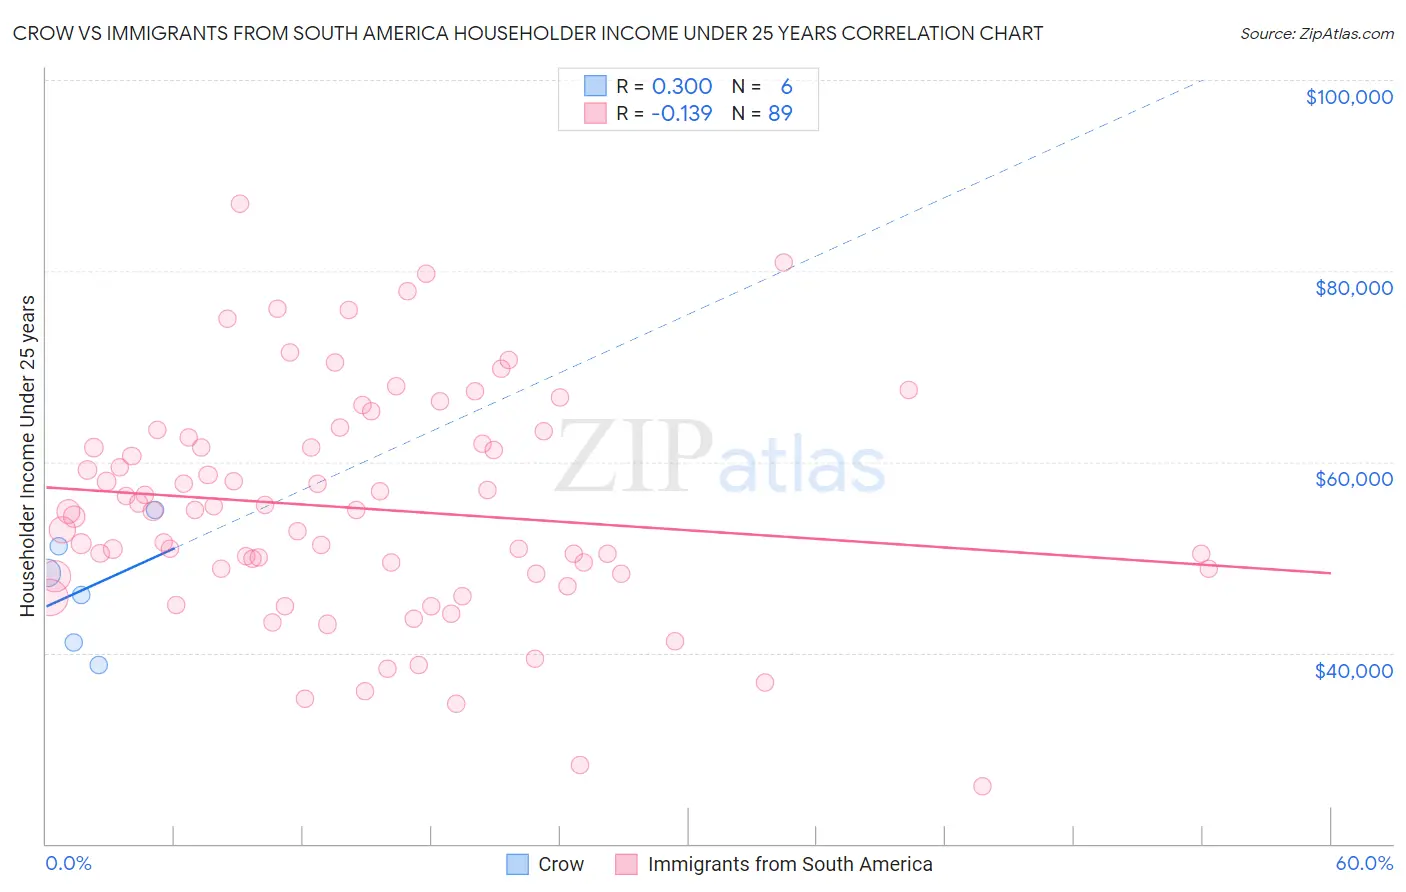 Crow vs Immigrants from South America Householder Income Under 25 years